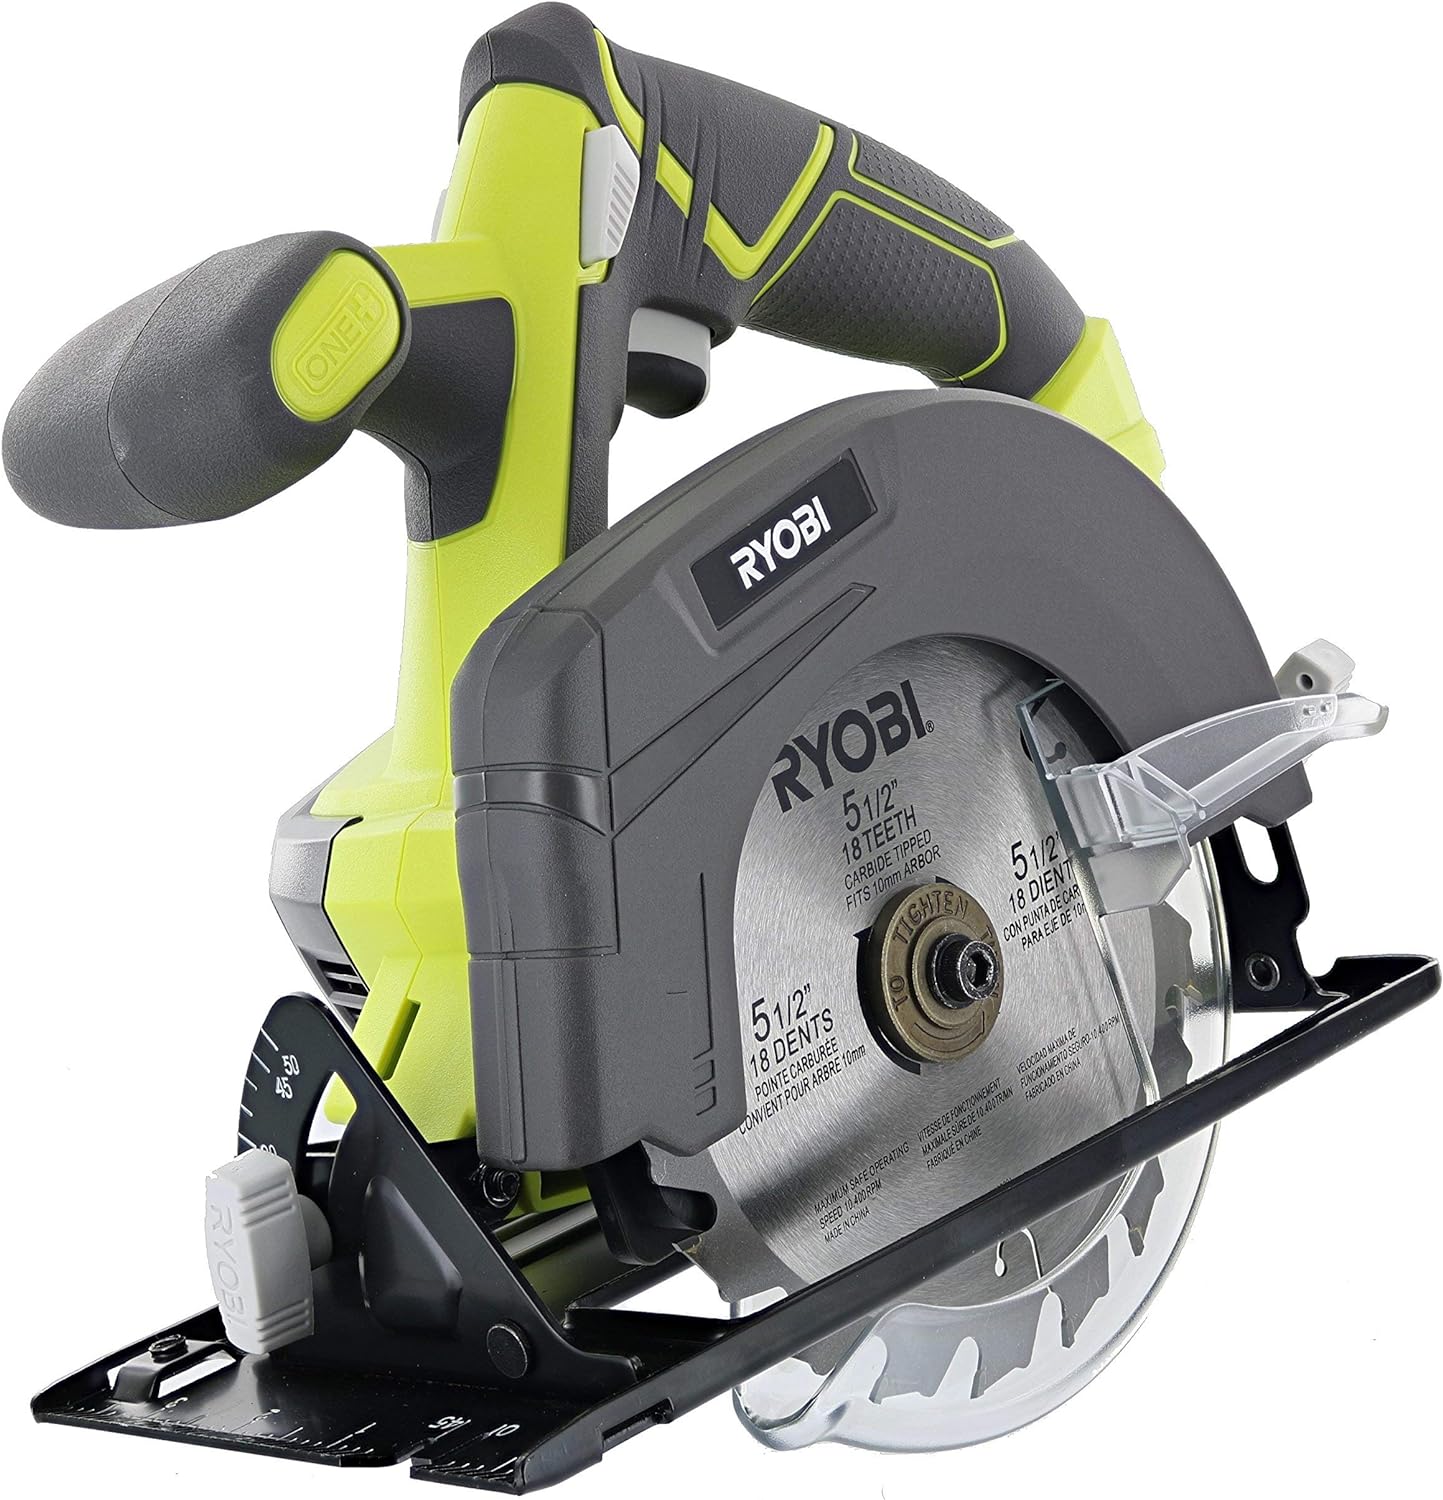 Ryobi One P505 18V Lithium Ion Cordless 5 1/2 4,700 RPM Circular Saw (Battery Not Included, Power Tool Only), Green